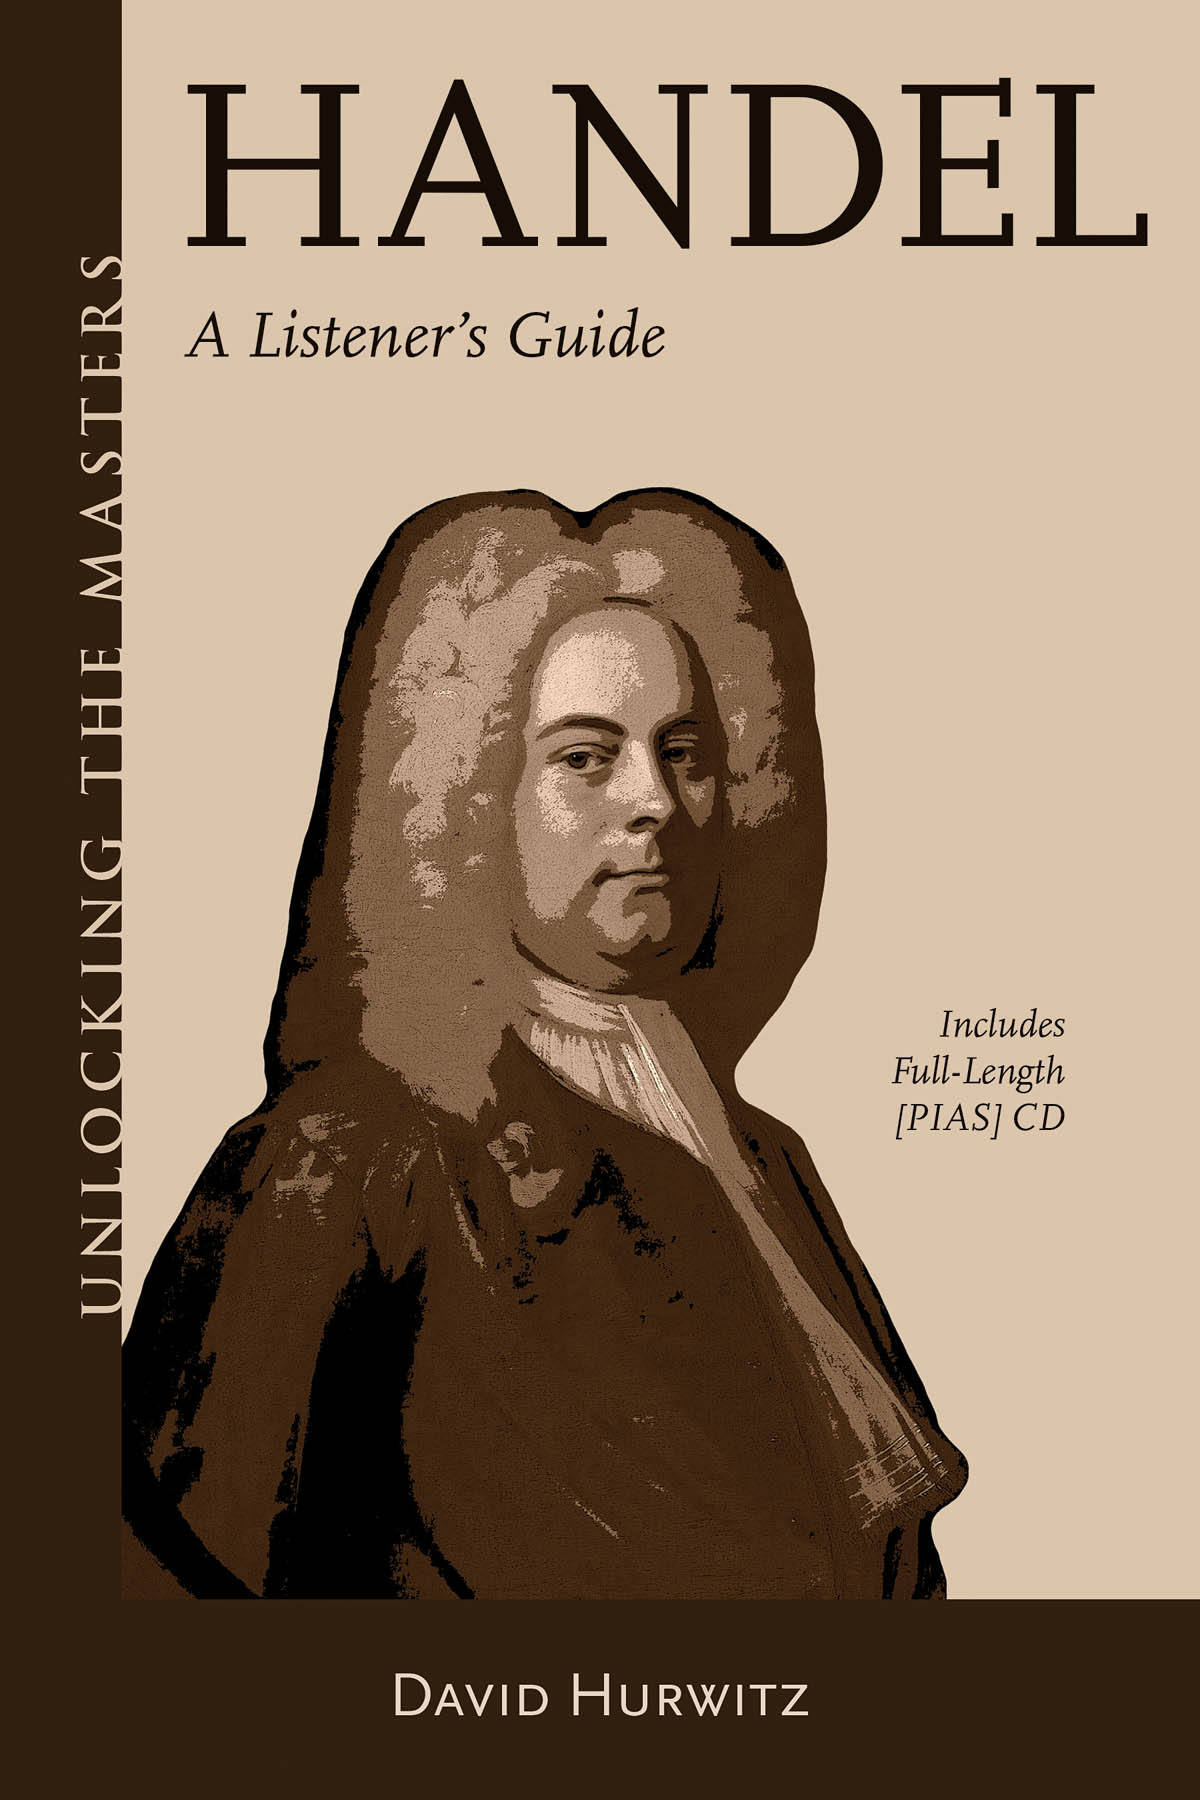 Listening to Handel: Reference Books